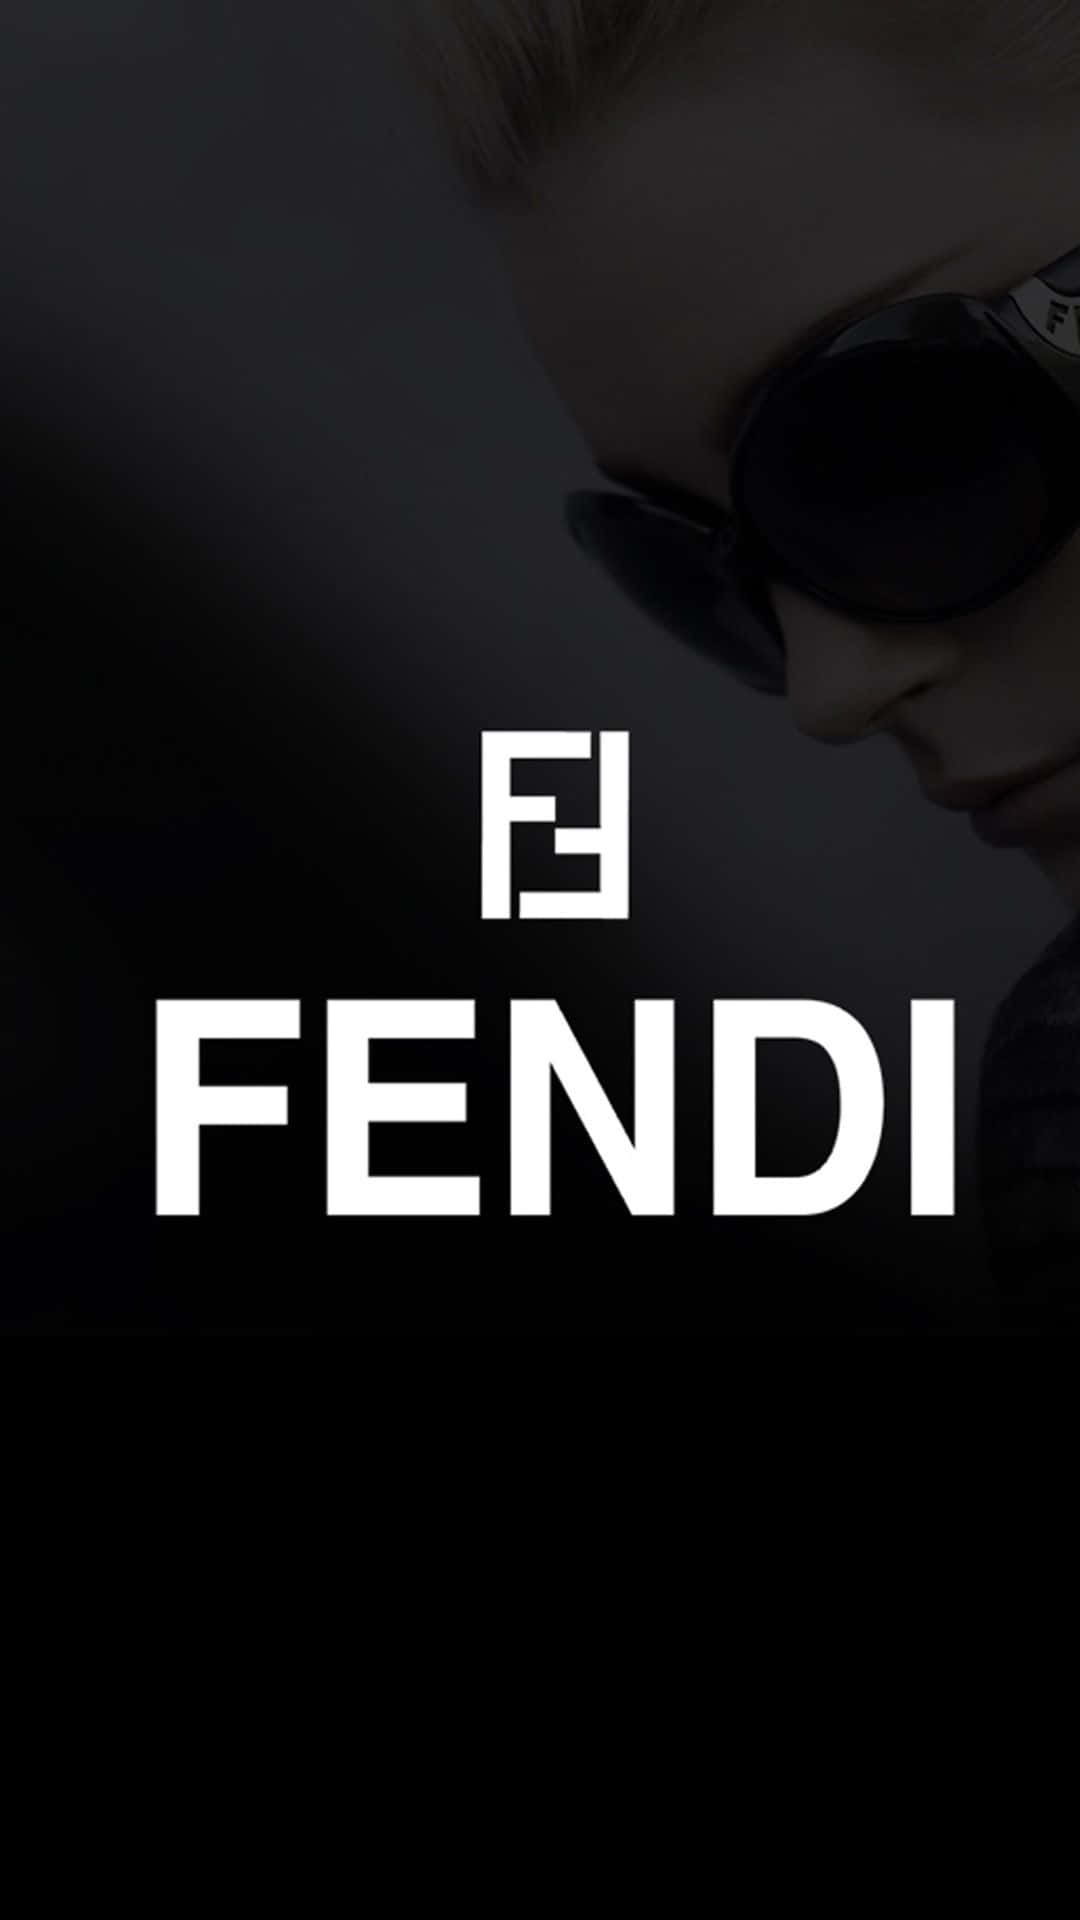 Stand out from the Crowd with Fendi